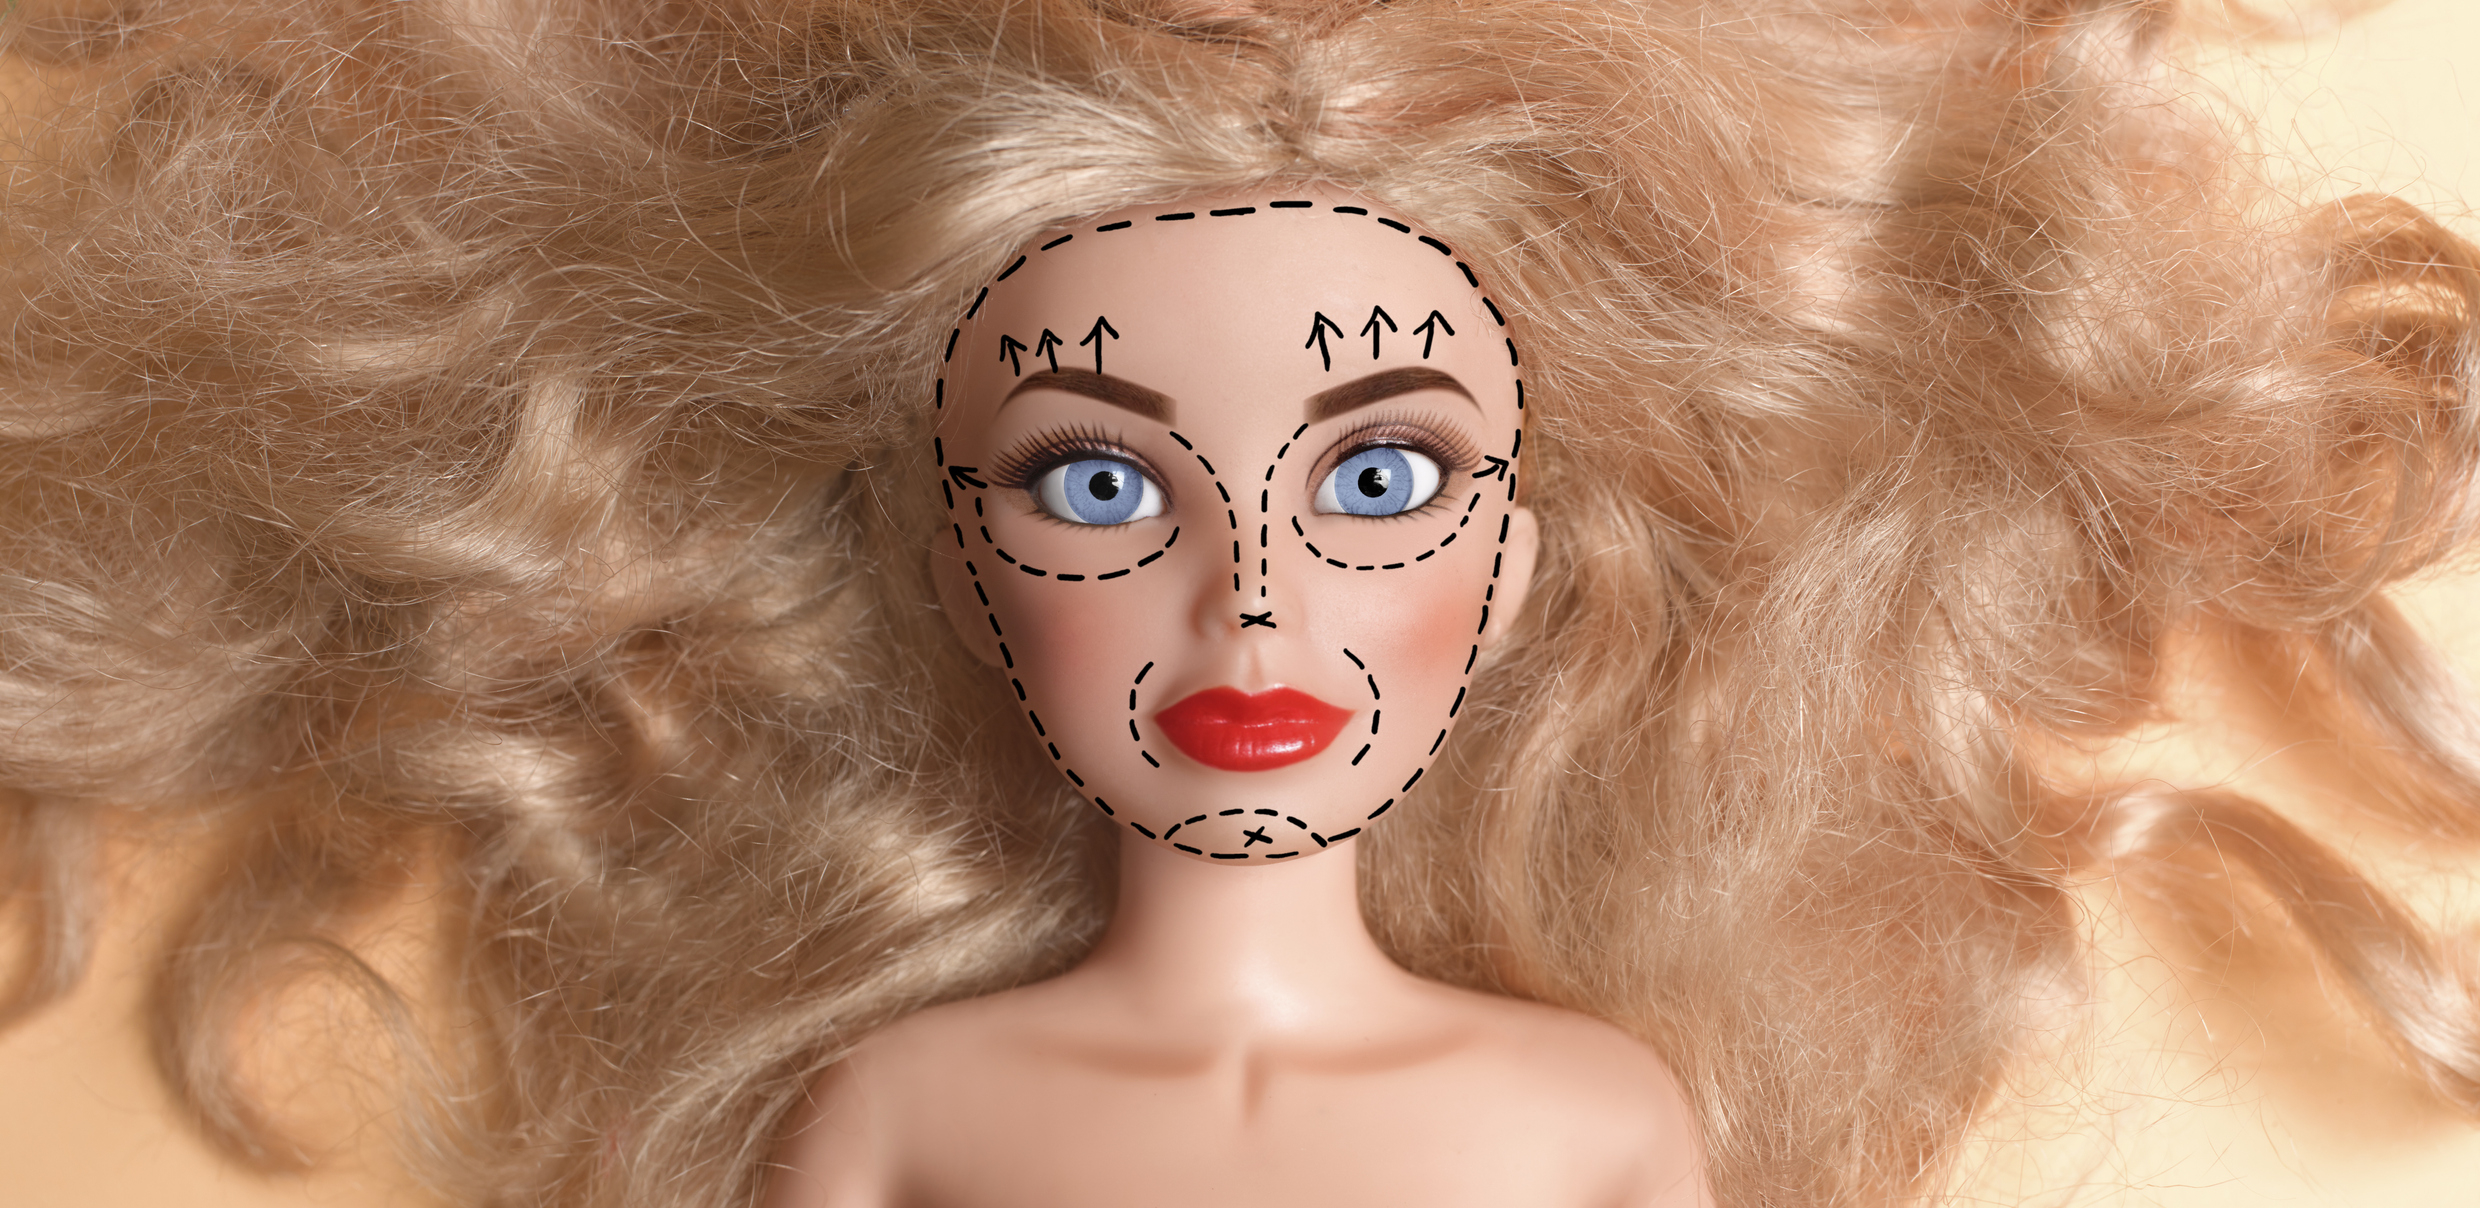 A doll with surgery markings on its face